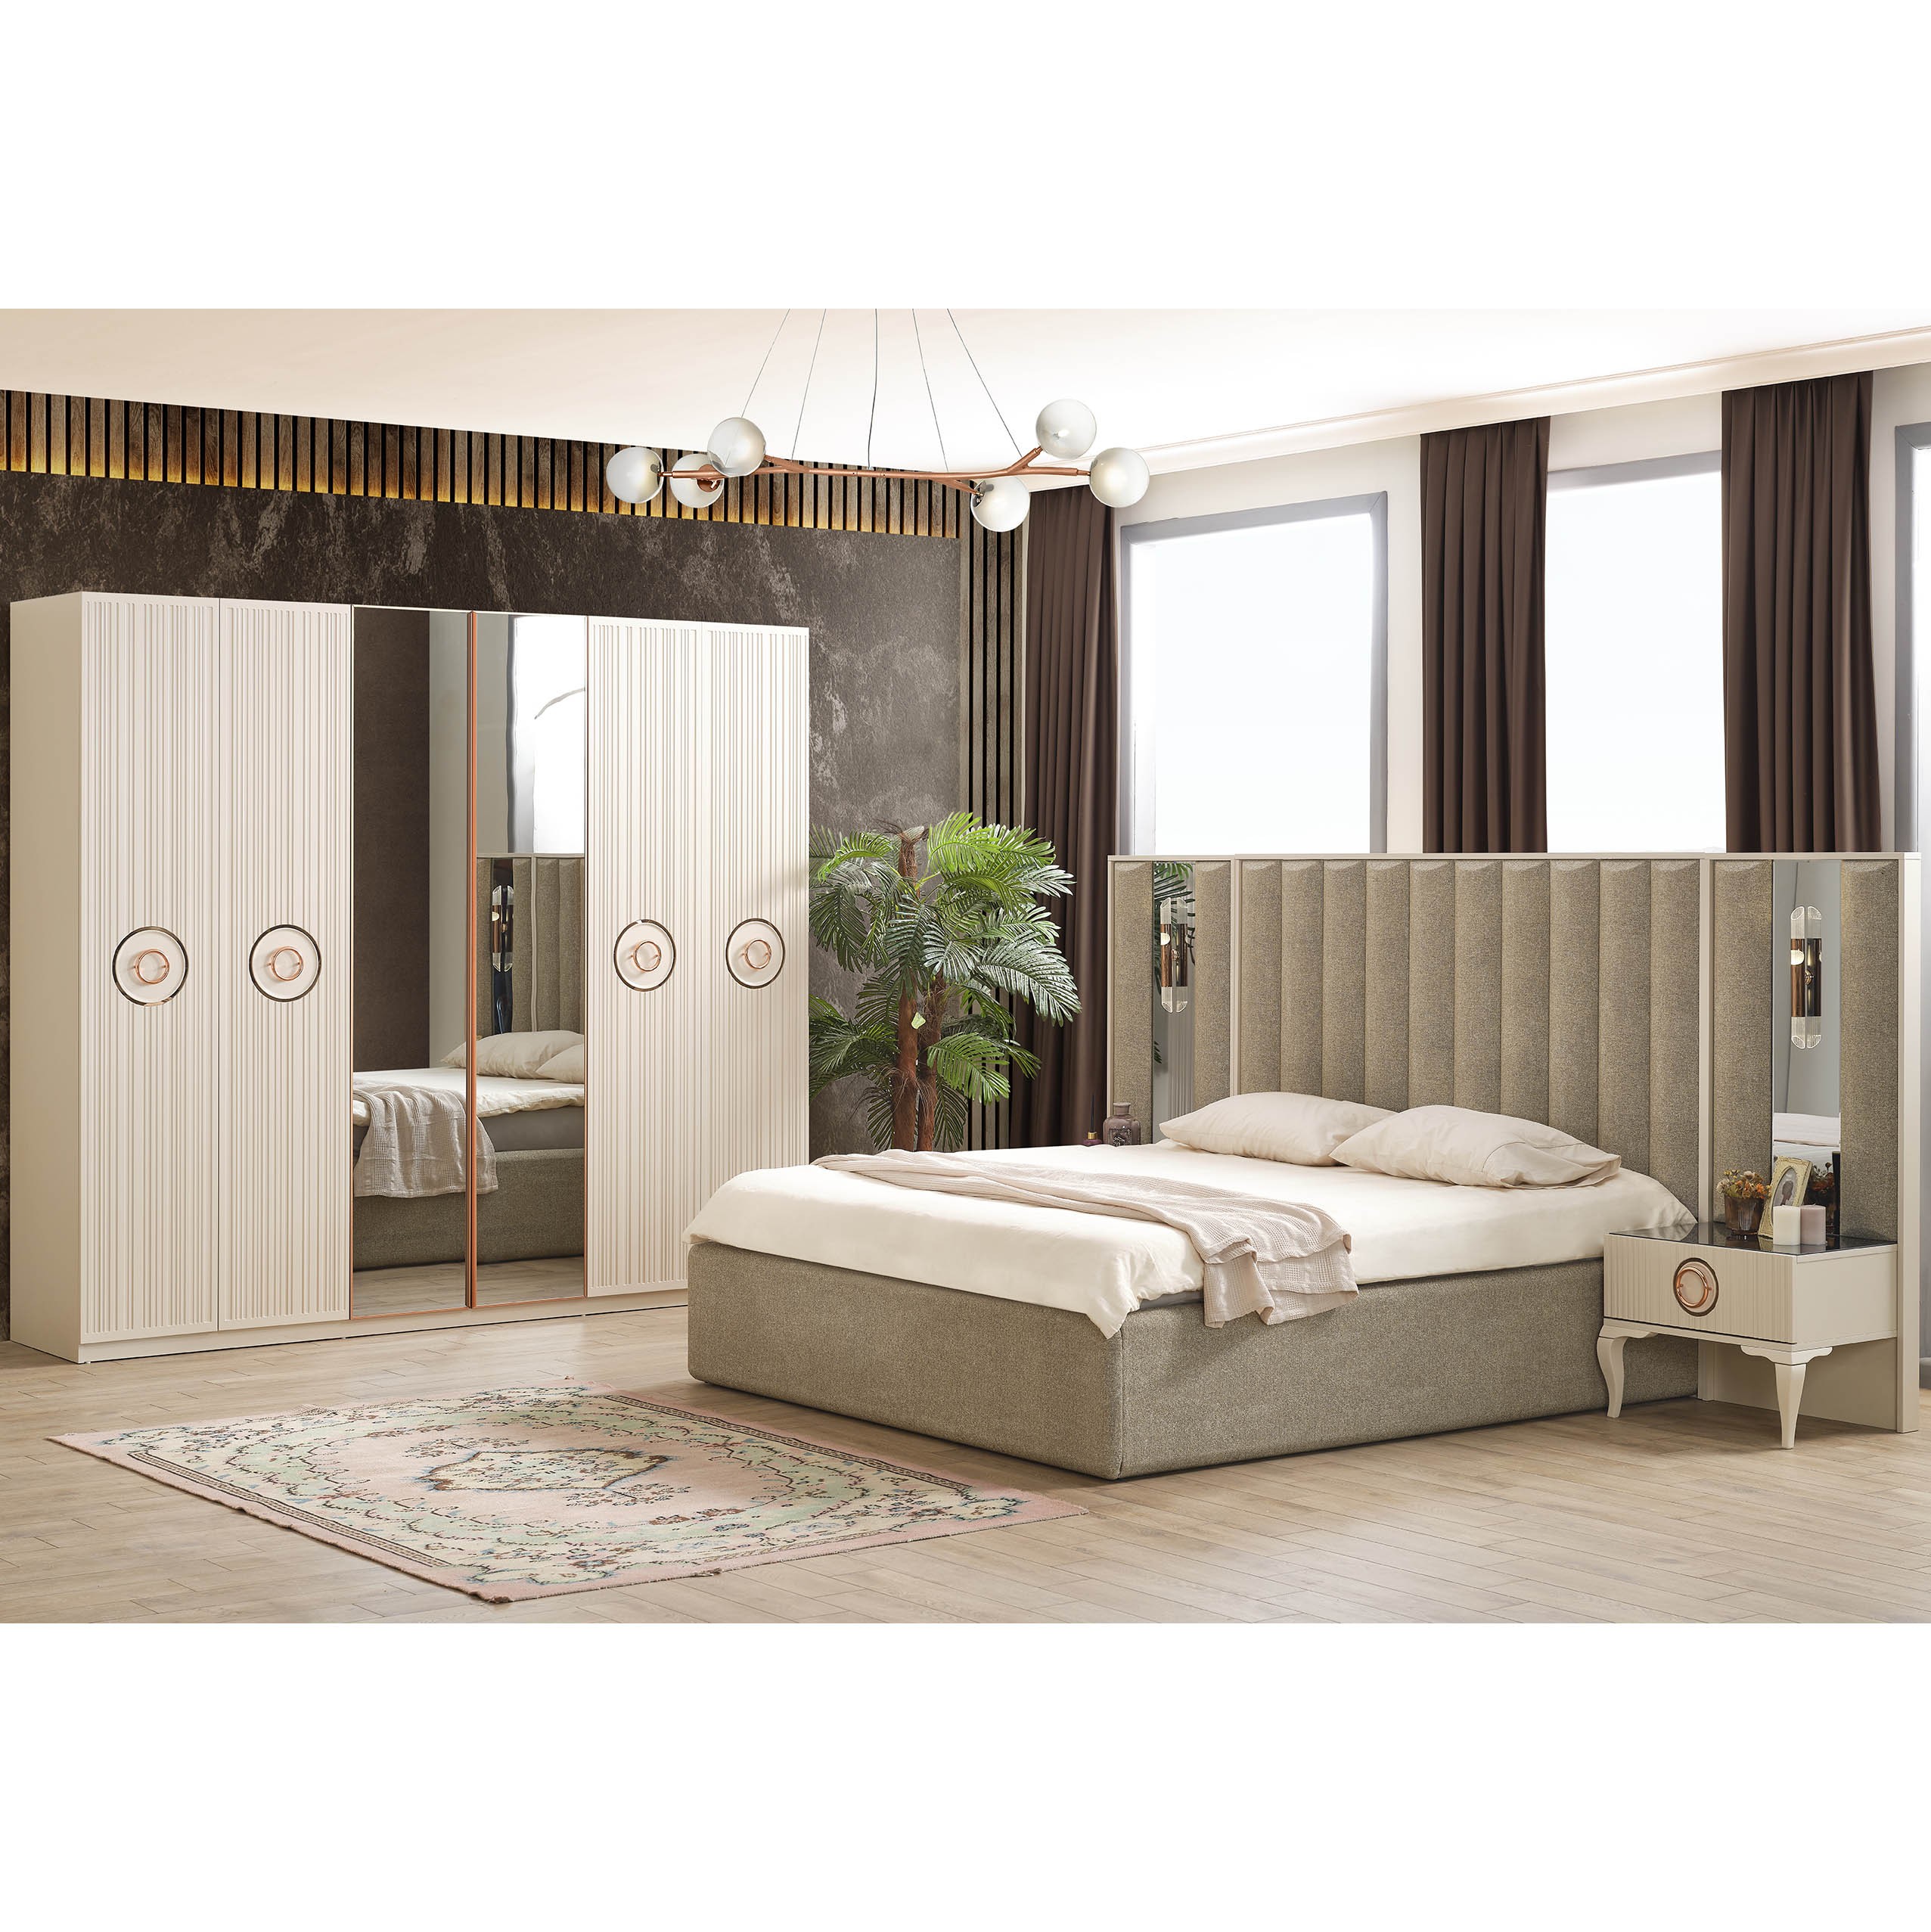 Style Larissa Vol1 Bed Without Storage 160x200 cm